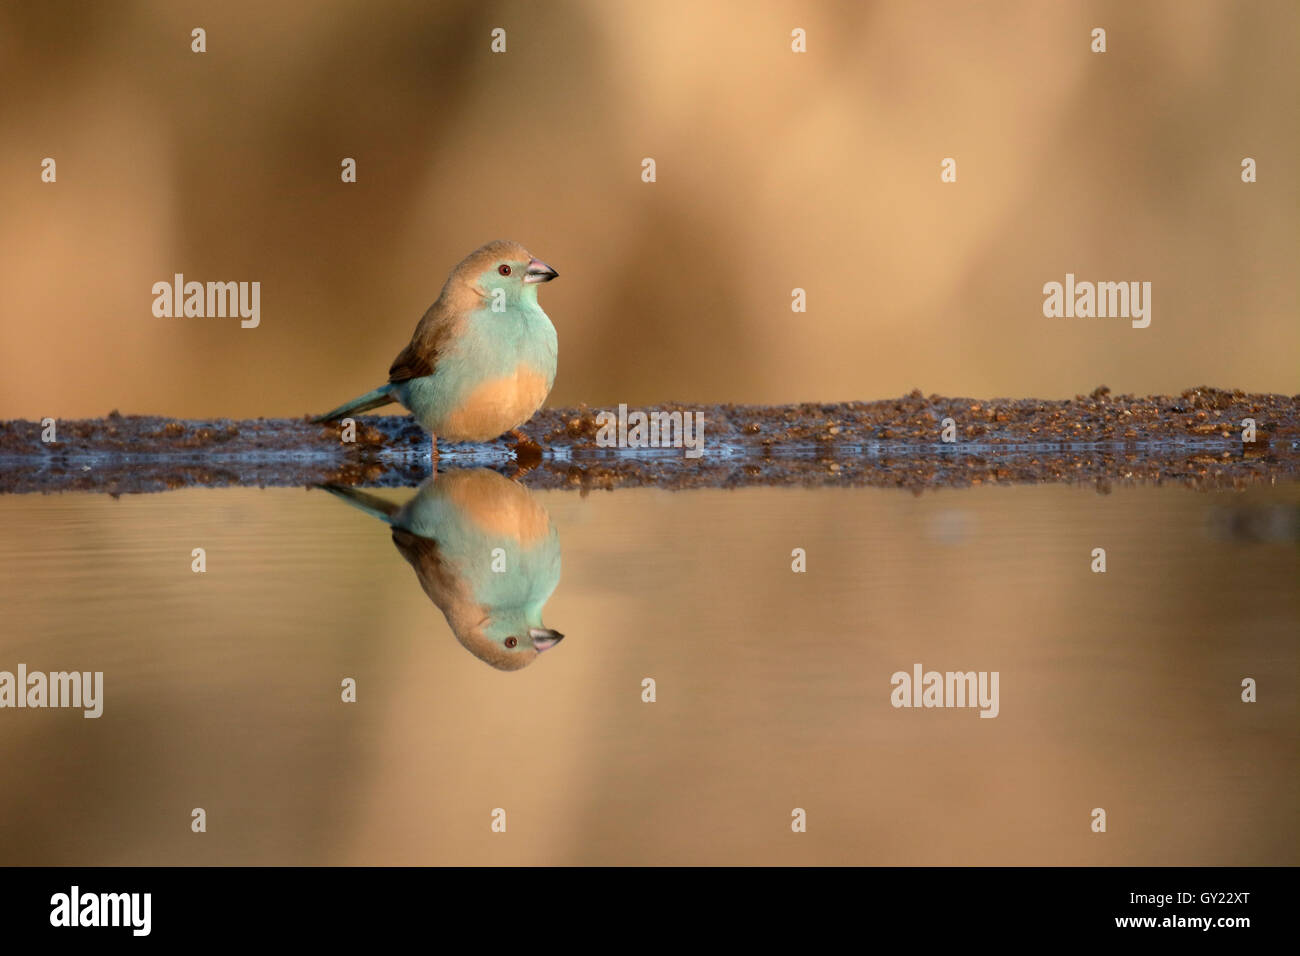 Blue waxbill or blue-breasted cordon-bleu, Uraeginthus angolensis, single bird at water, South Africa, August 2016 Stock Photo